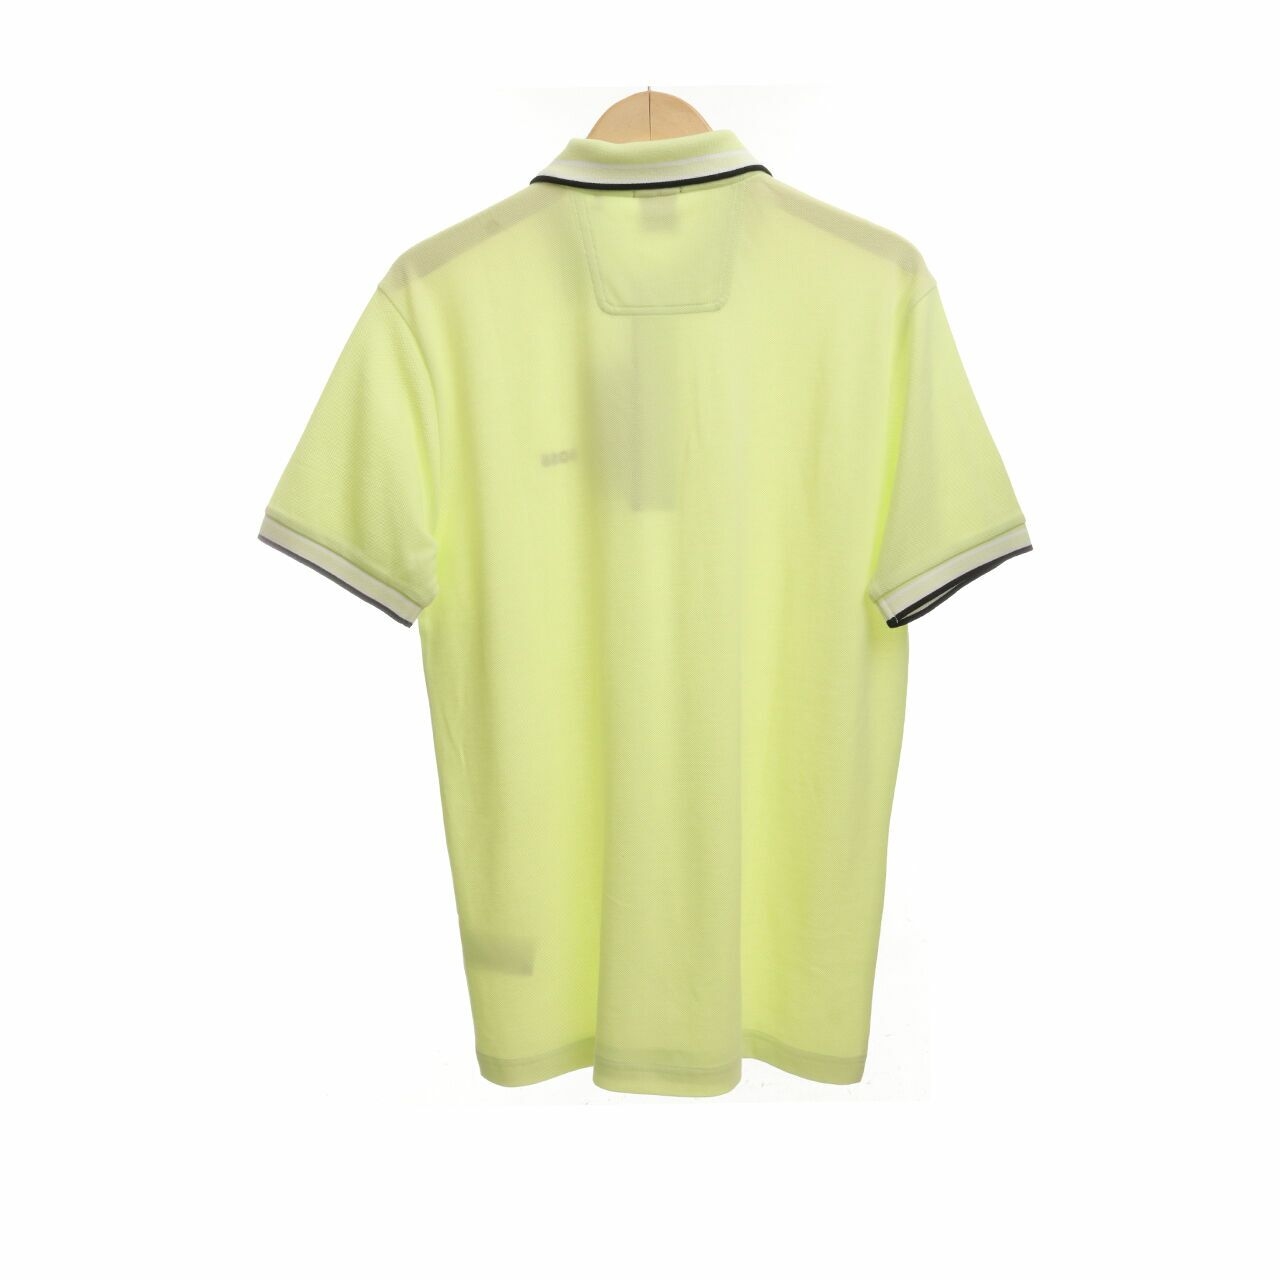 Hugo Boss Polo Shirt Paddy Athleisure In Green Lime With Collar Logo XL T-Shirt